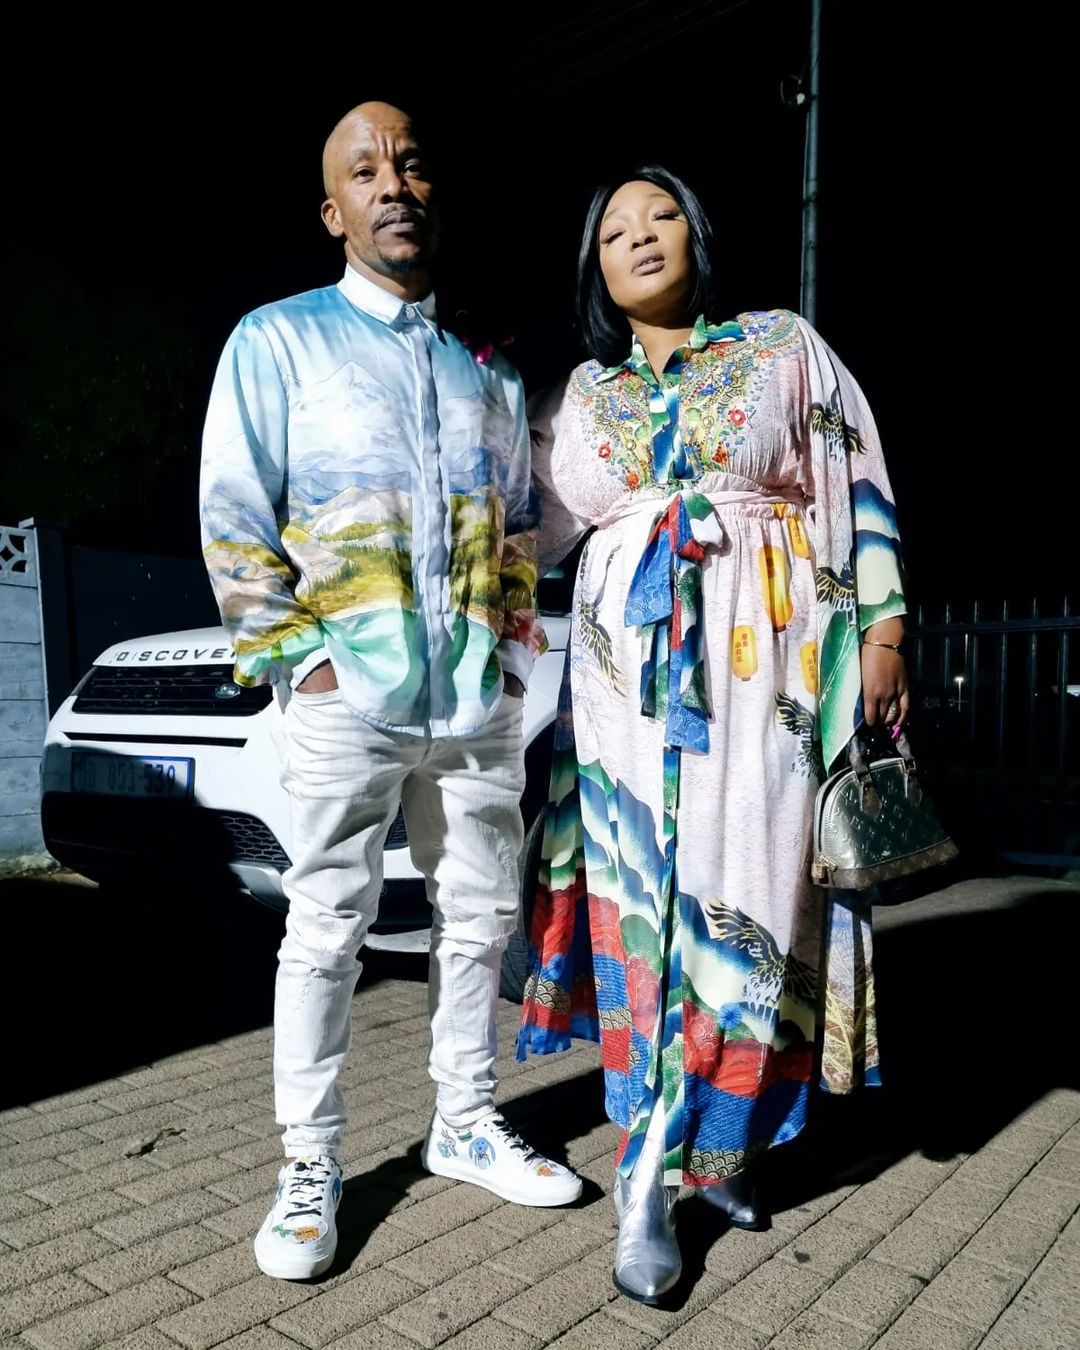 Mduduzi Mabaso with his wife